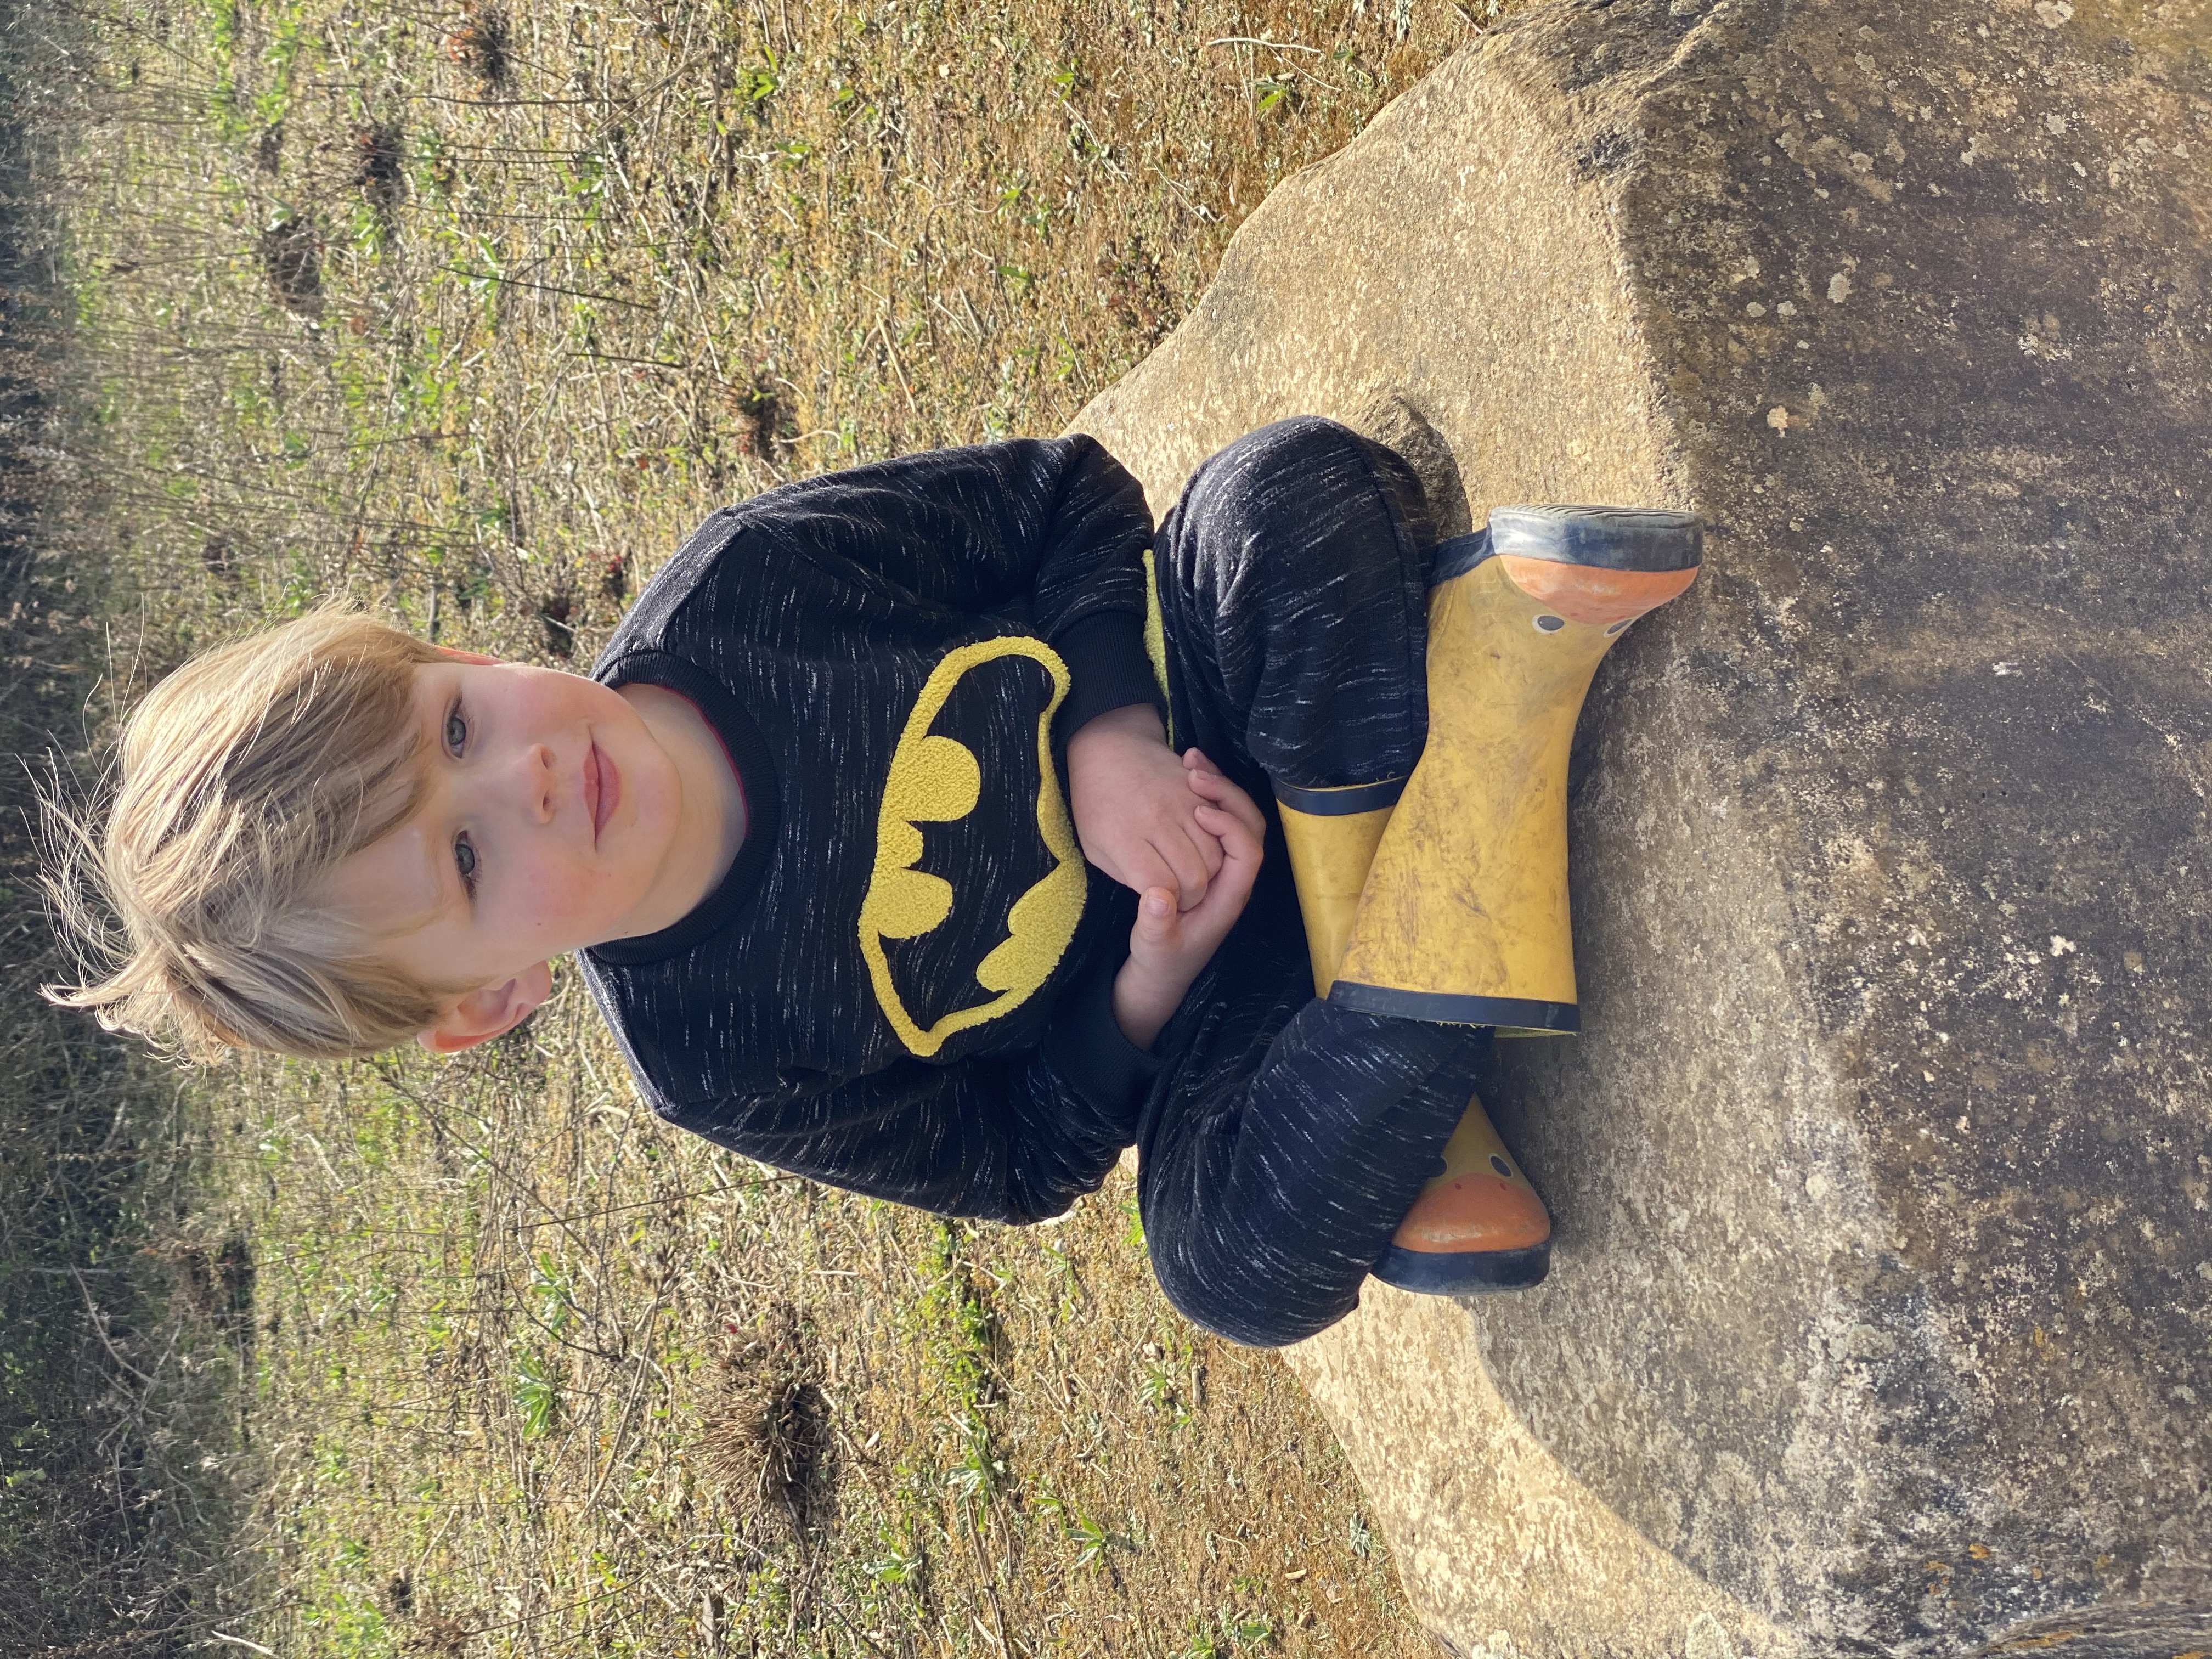 Young boy sat cross-legged on a rock wearing yellow wellies and a Batman top